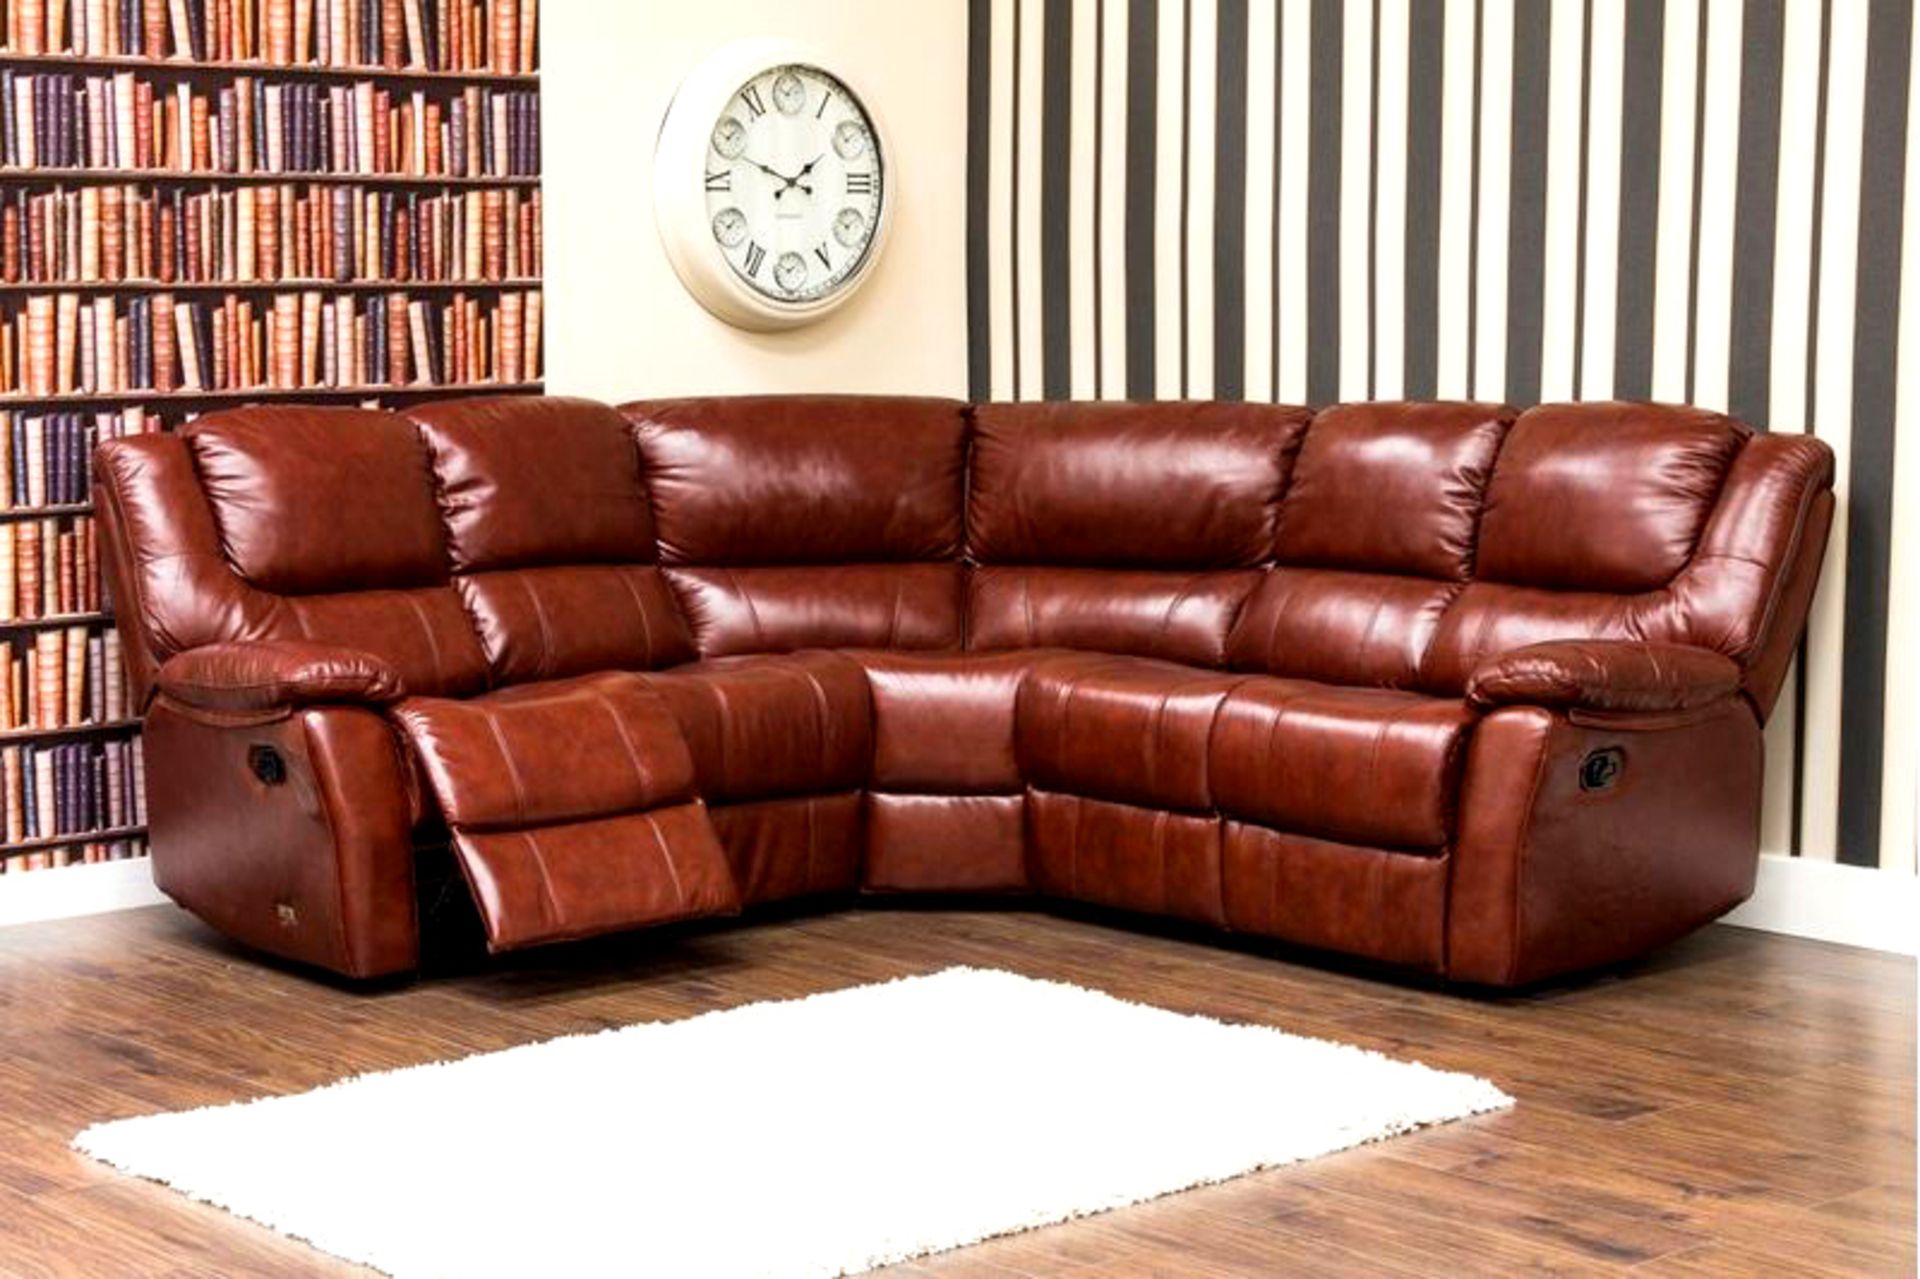 Brand new boxed direct from the manufacturers Harvard 3 seater plus 2 arm chairs in full top grade